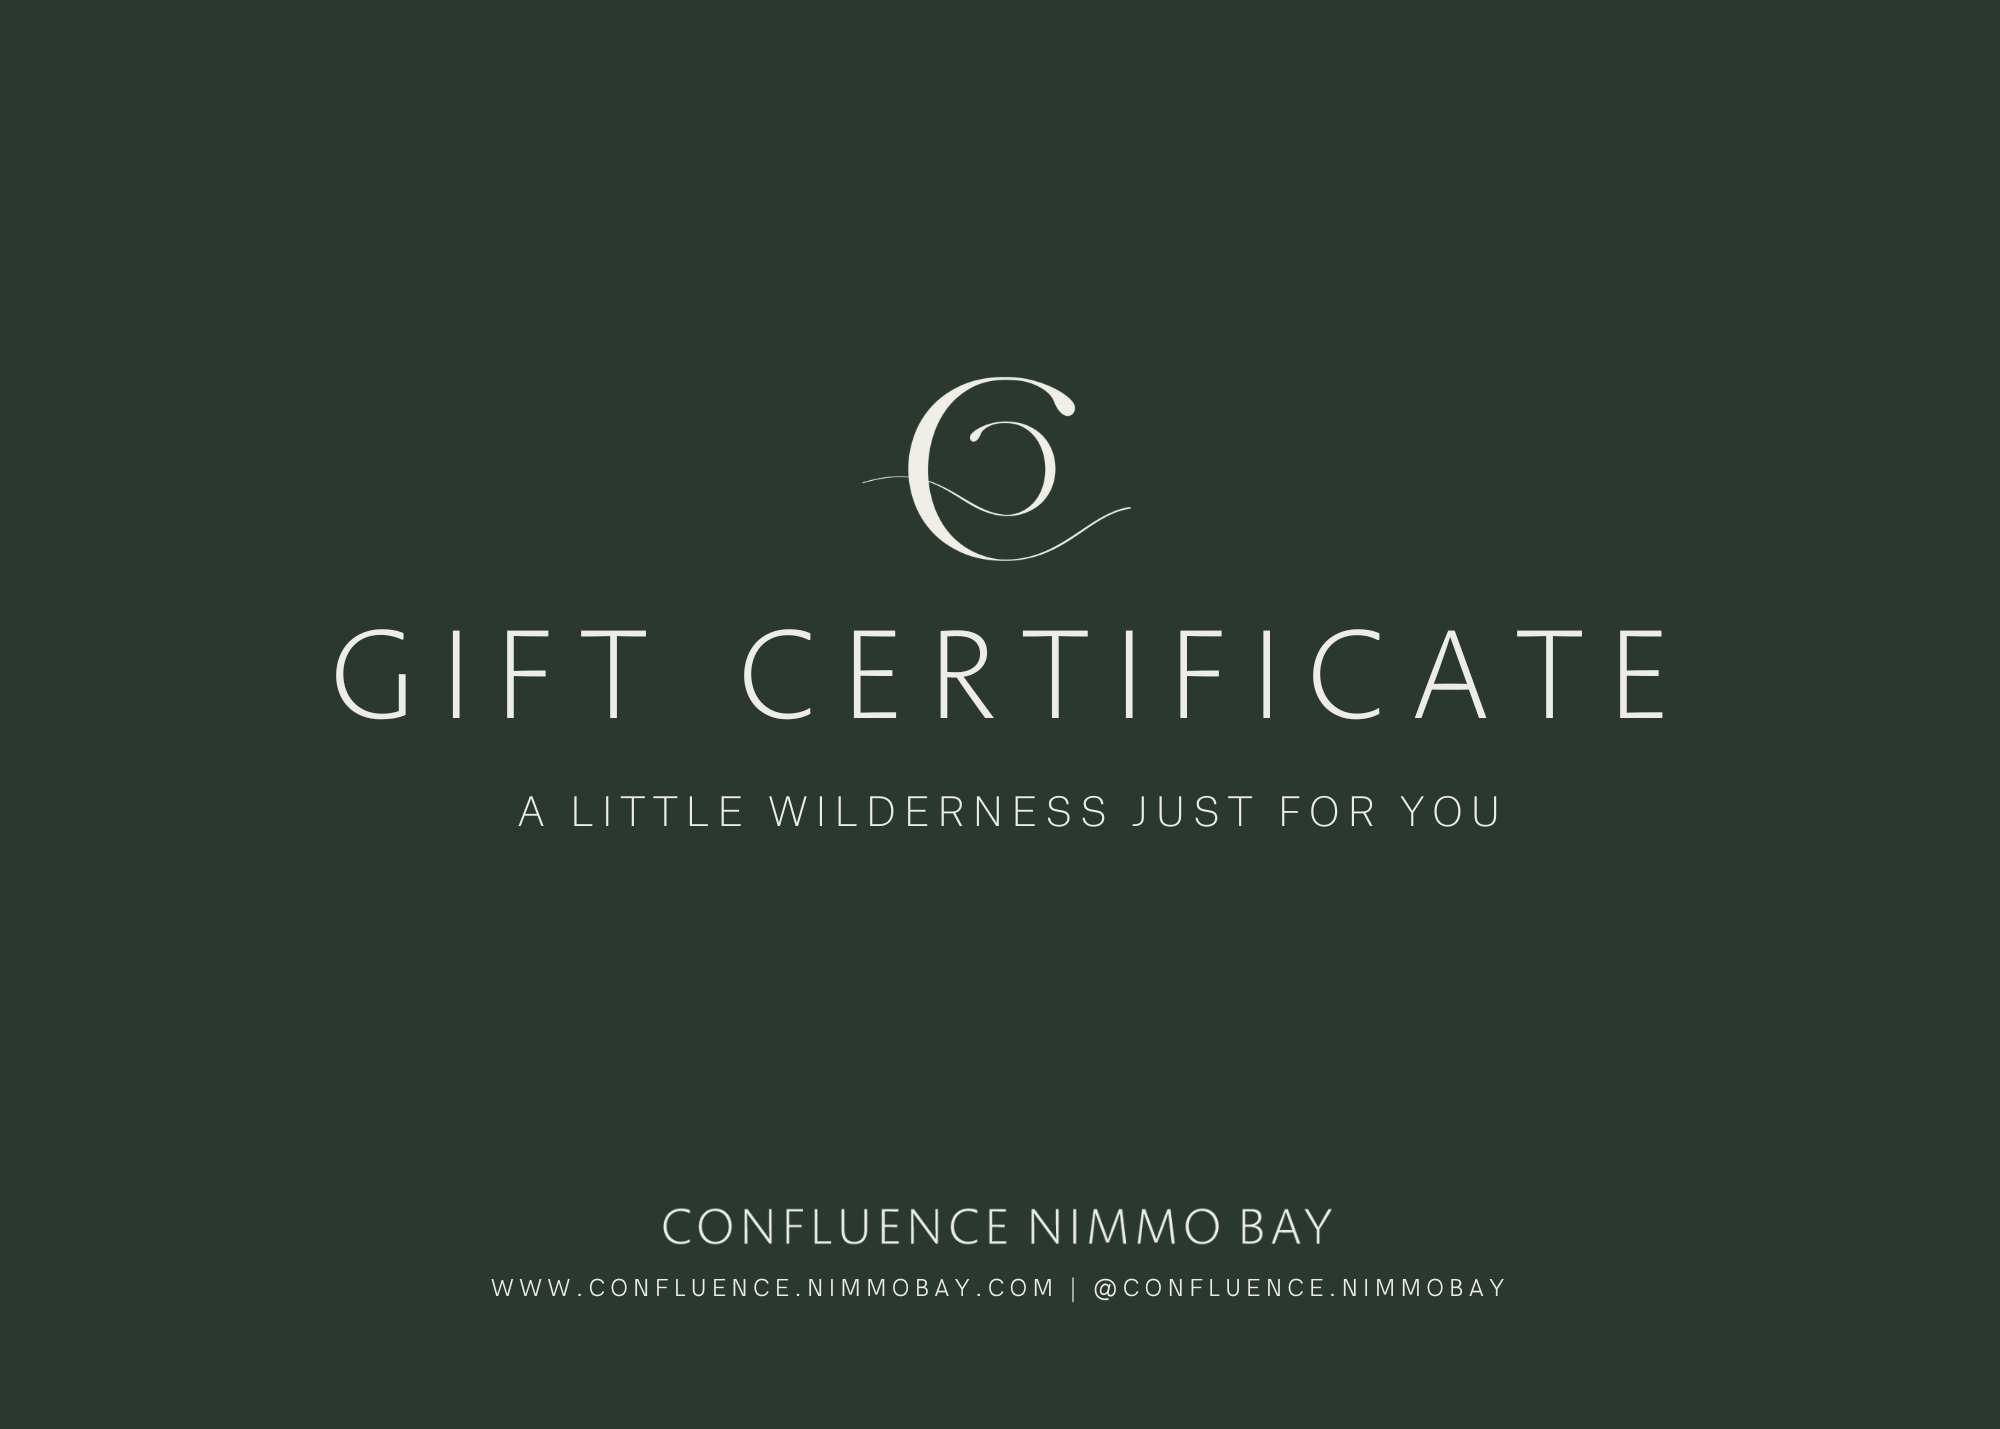 Confluence Nimmo Bay gift certificate